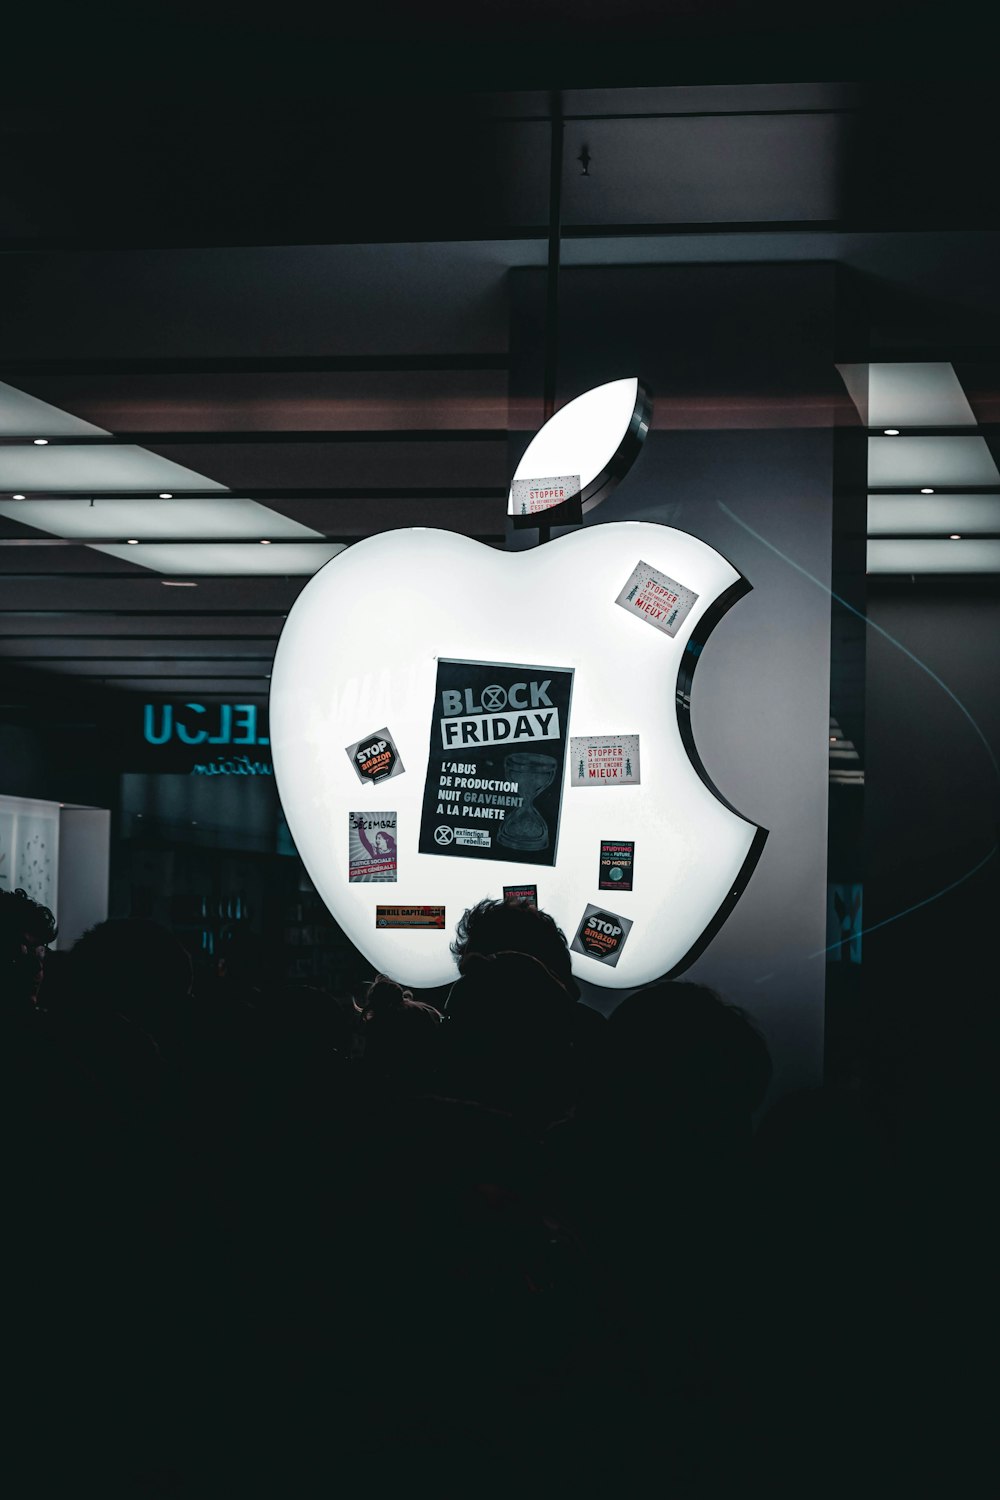 an apple advertisement is displayed in a dark room